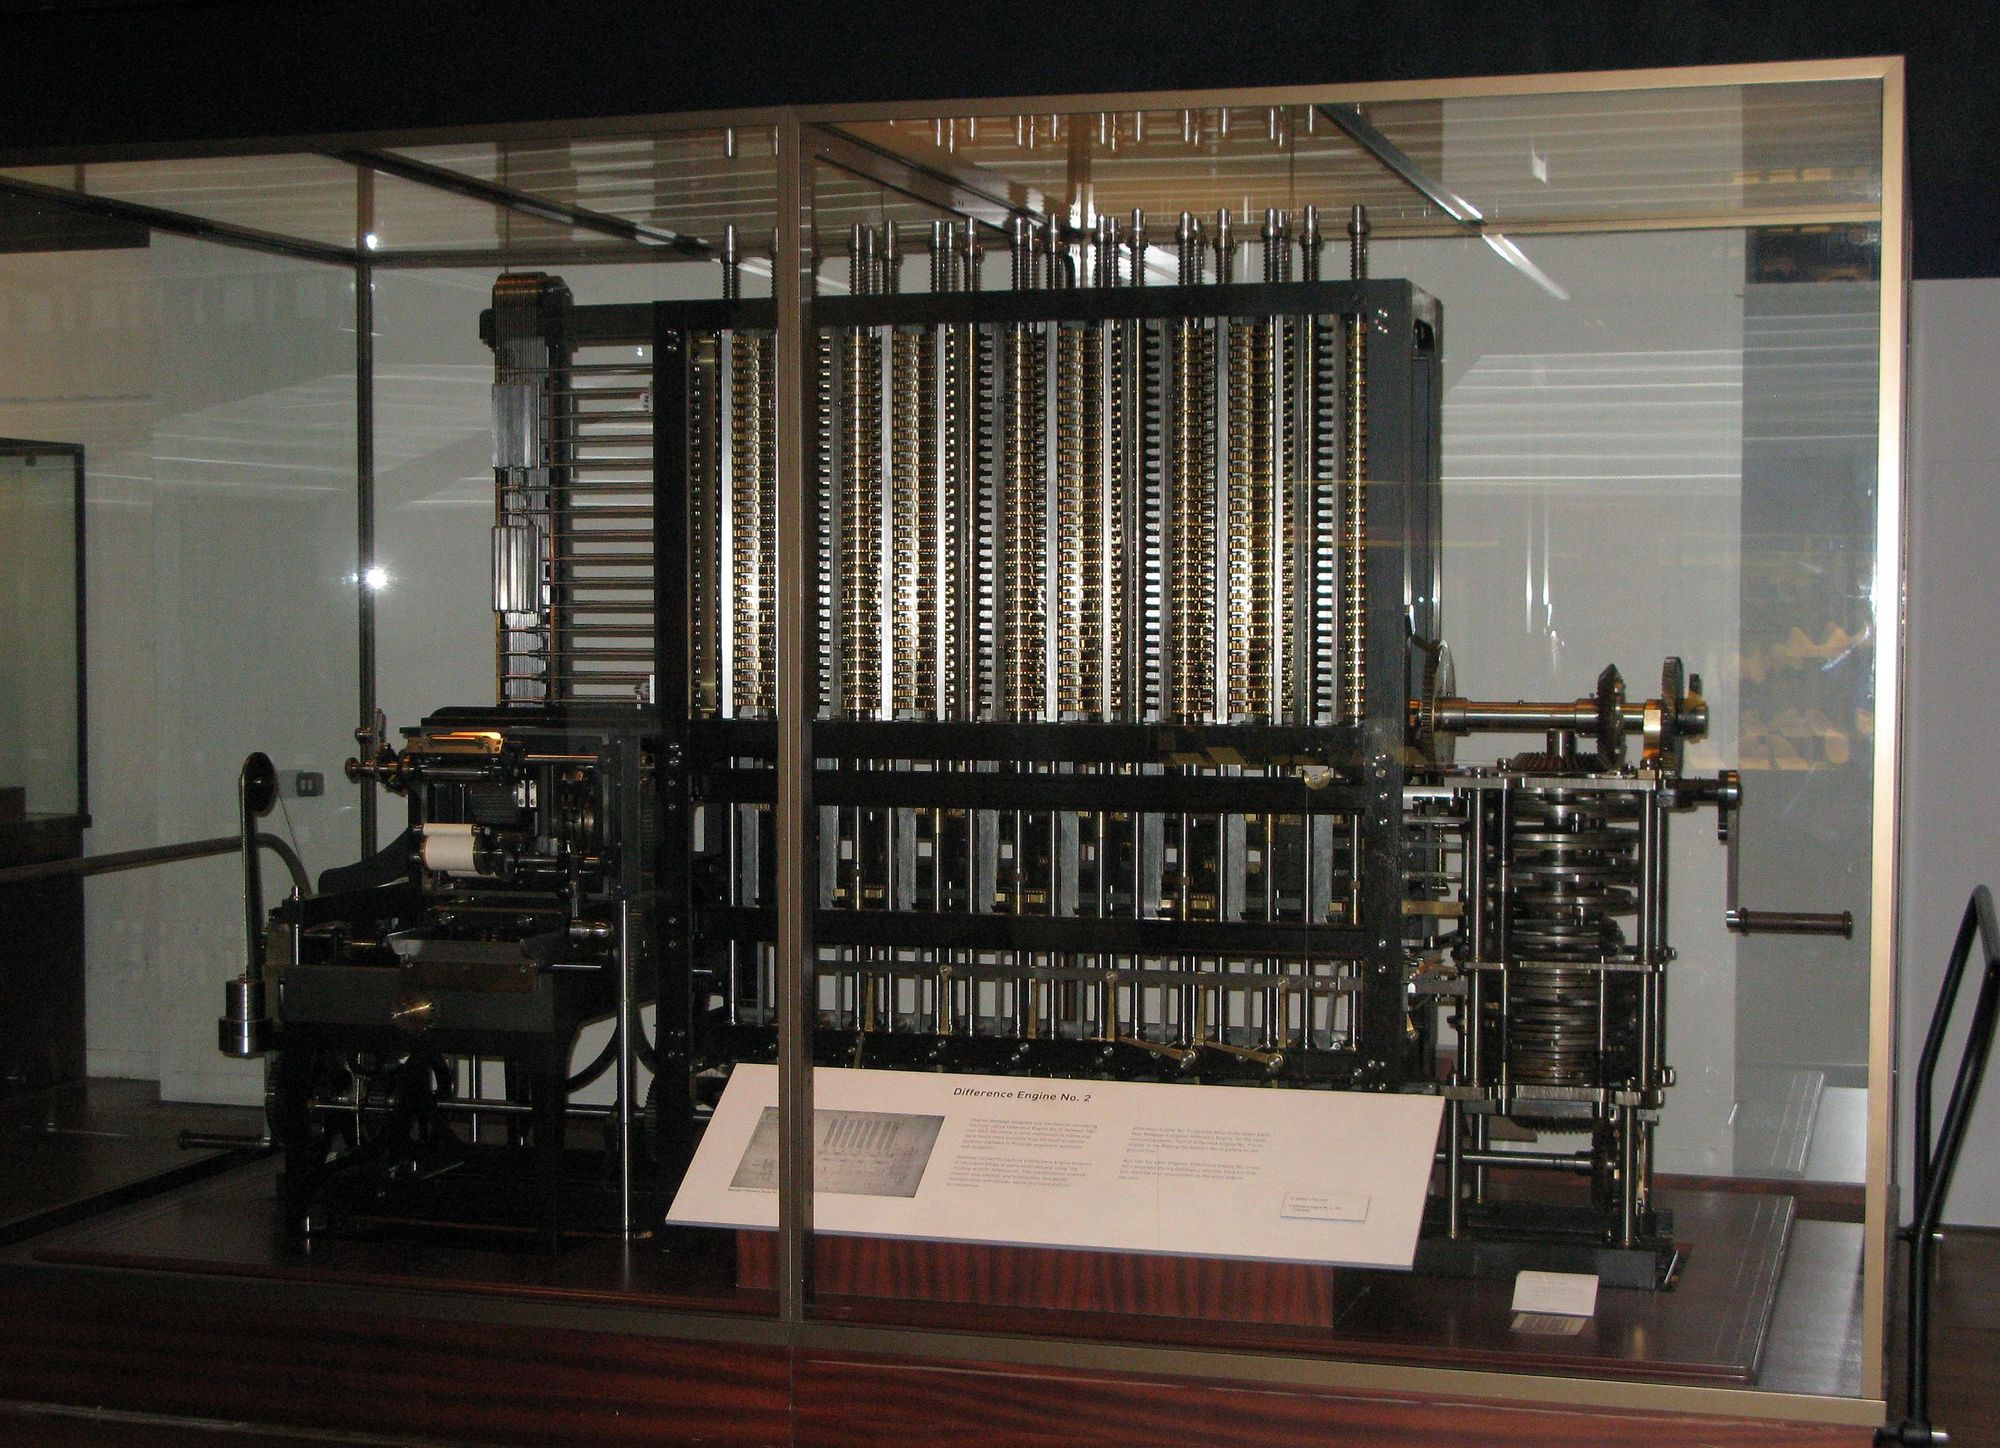 Charles Babbage’s Difference Engine, developed in the 19th century, built from 1989 to 1991 - Science Museum, London. 